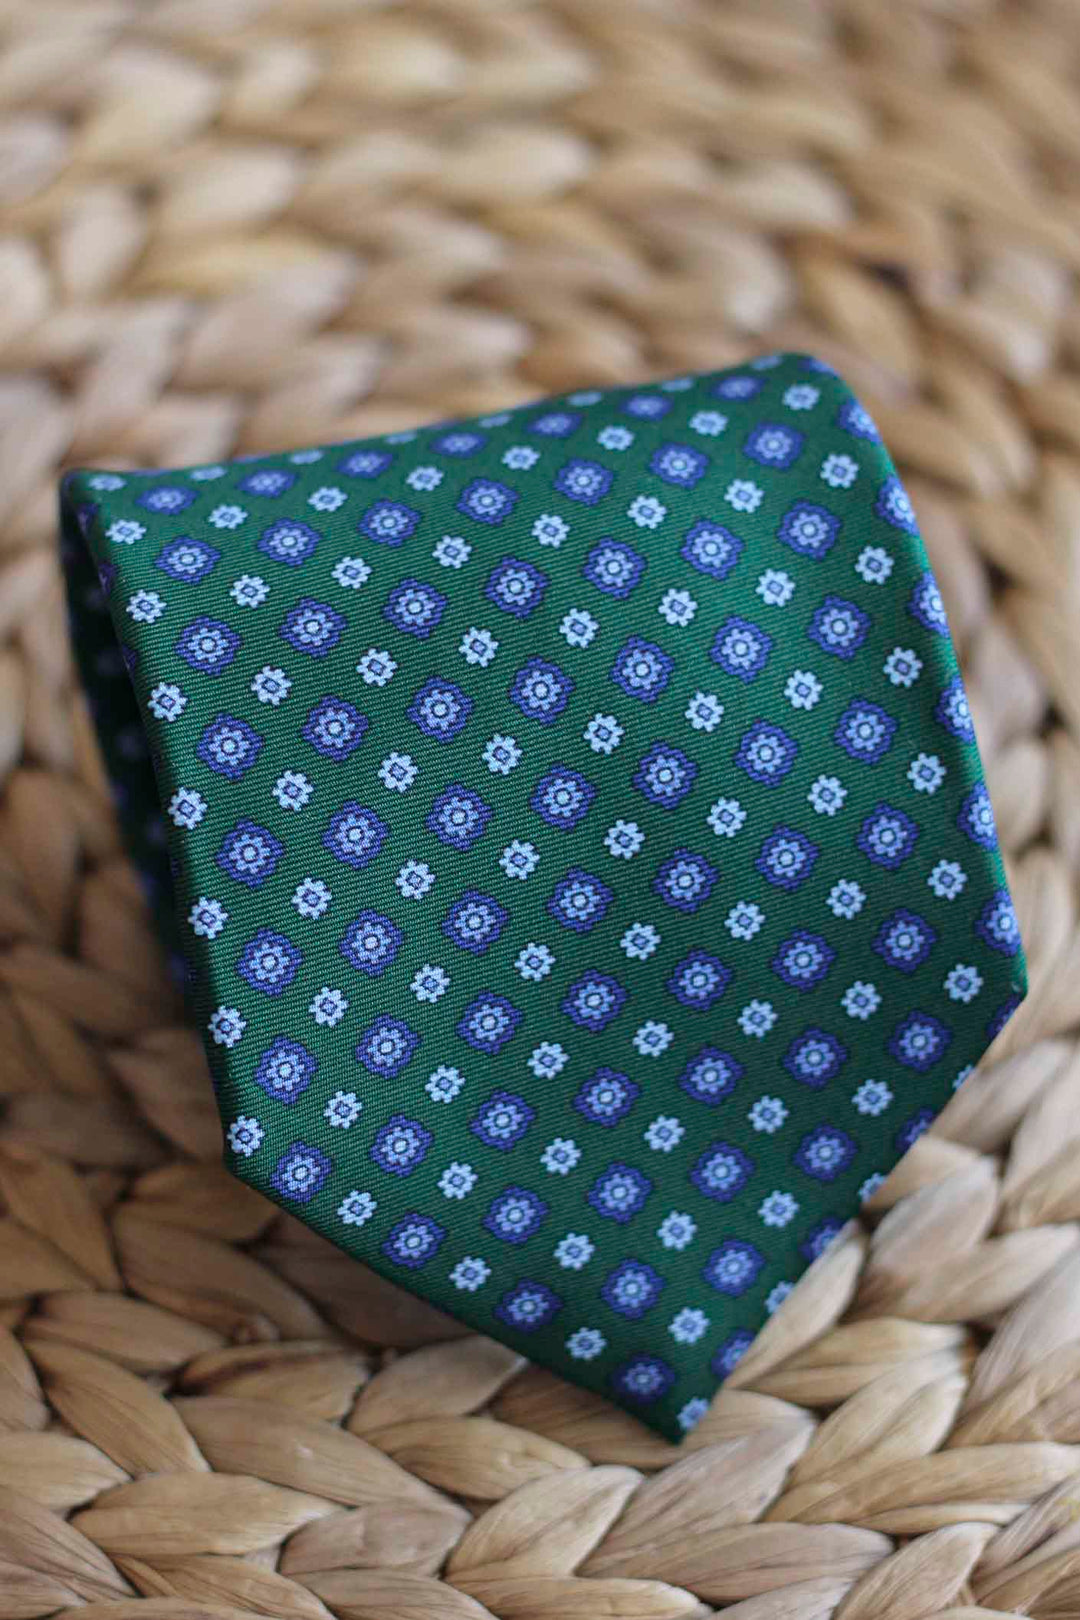 Green Silk Tie with Blue Tones Daisies